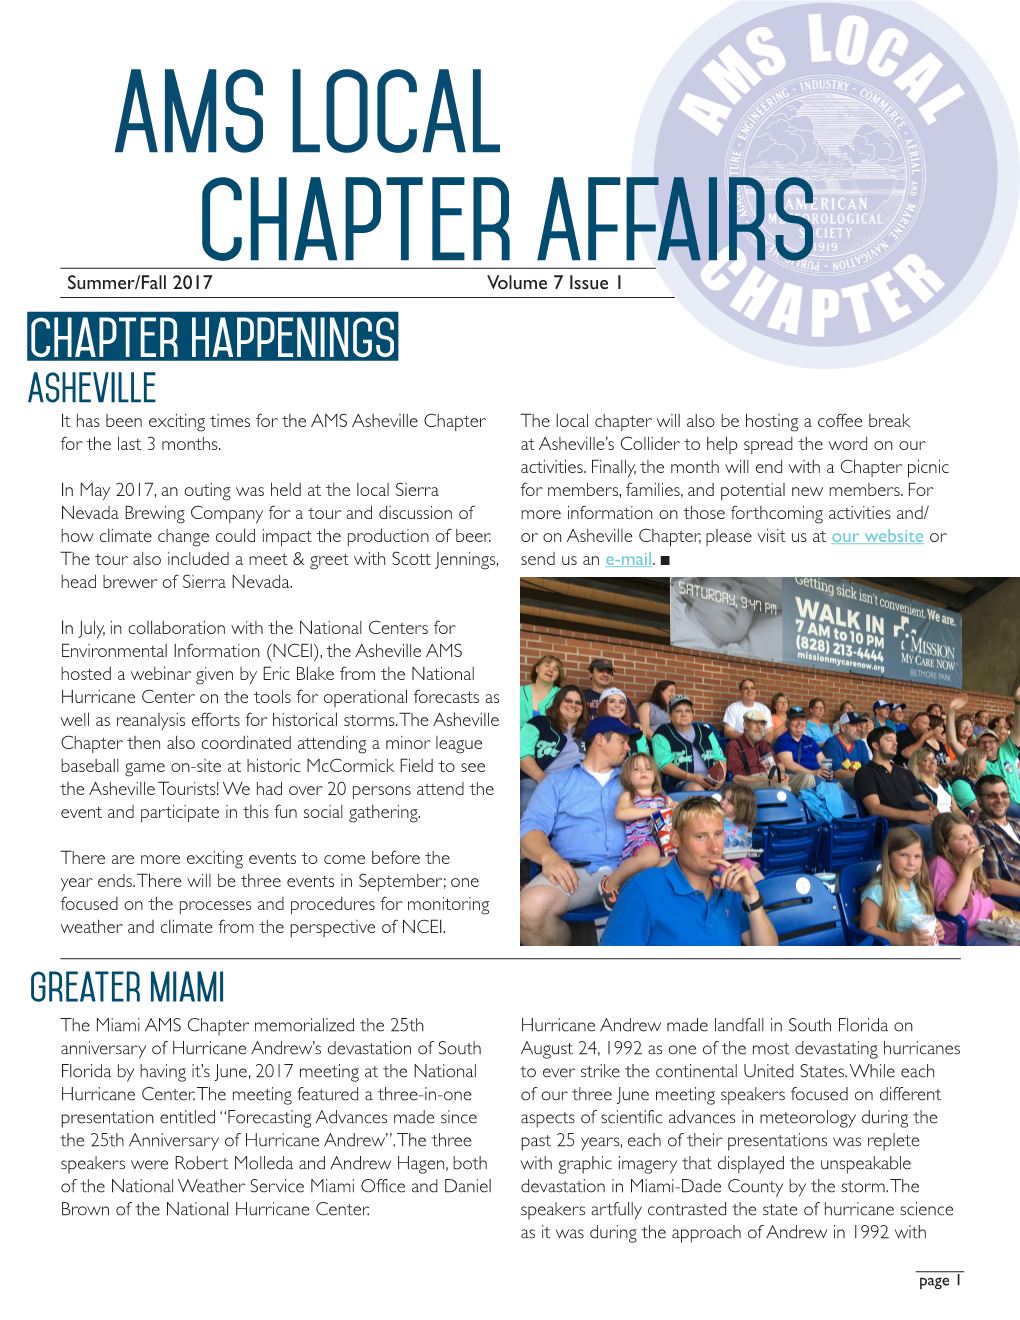 AMS Local Chapter Newsletter Volume 7 Issue 1 (Summer/Fall 2017)